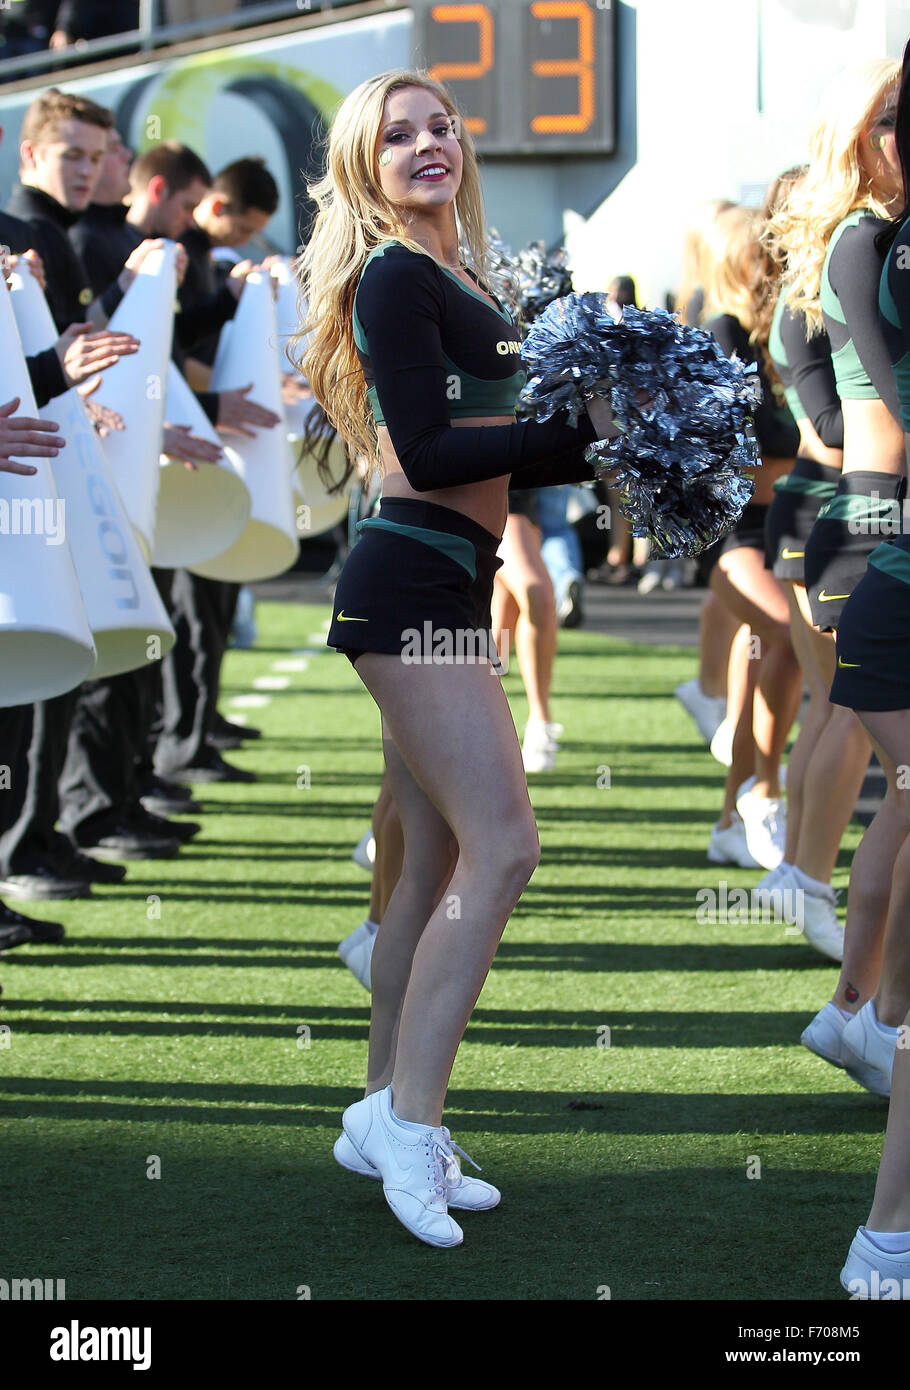 Autzen Stadium, Eugene, OR, USA. 21st Nov, 2015. An Oregon cheerleader entertains the crowd during the NCAA football game between the Ducks and the USC Trojans at Autzen Stadium, Eugene, OR. Larry C. Lawson/CSM/Alamy Live News Stock Photo